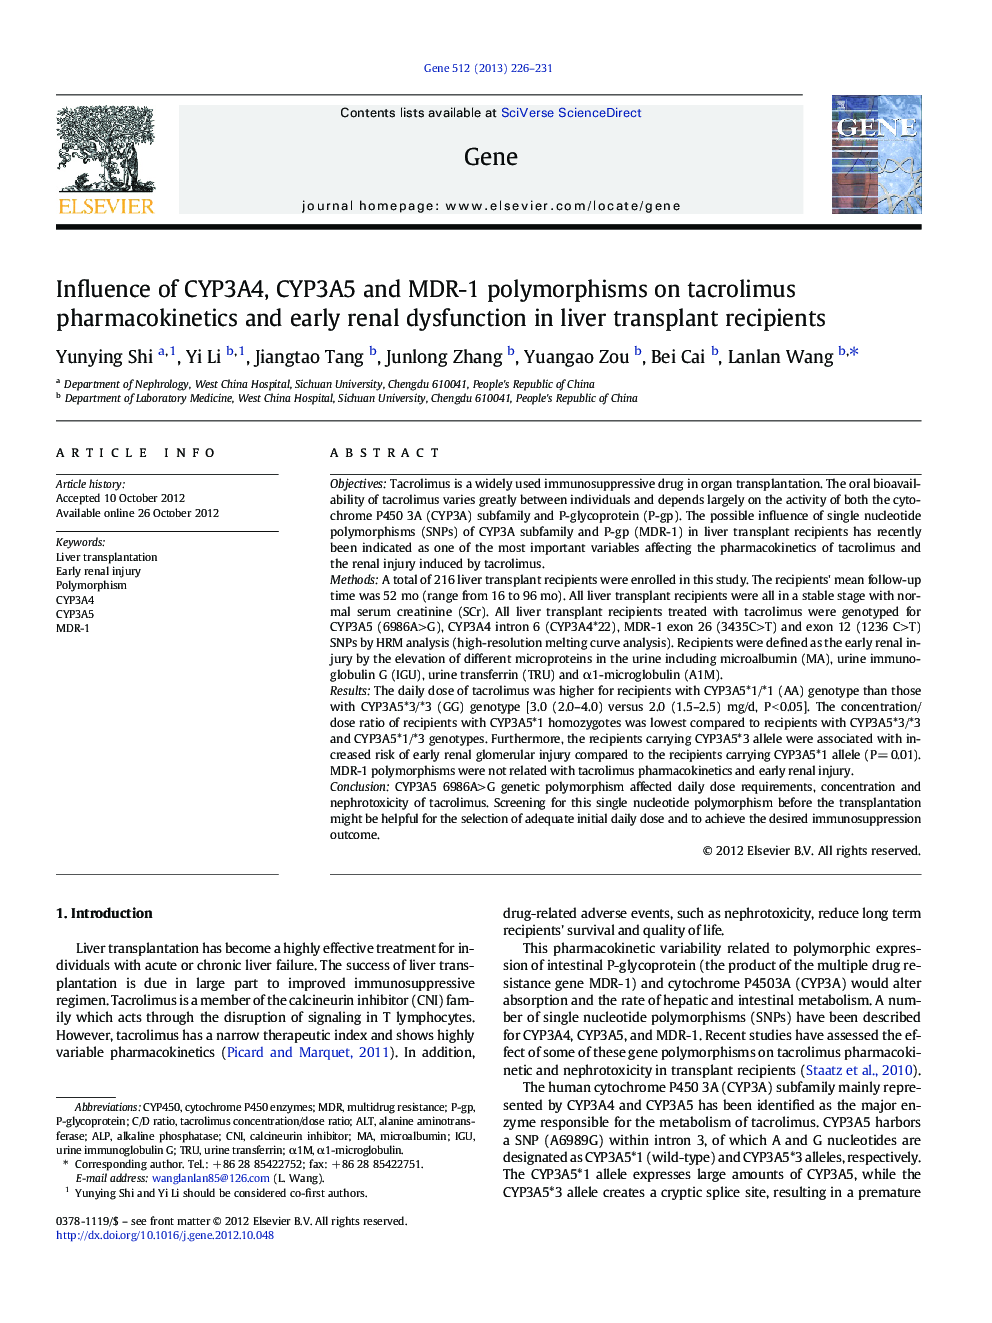 Influence of CYP3A4, CYP3A5 and MDR-1 polymorphisms on tacrolimus pharmacokinetics and early renal dysfunction in liver transplant recipients